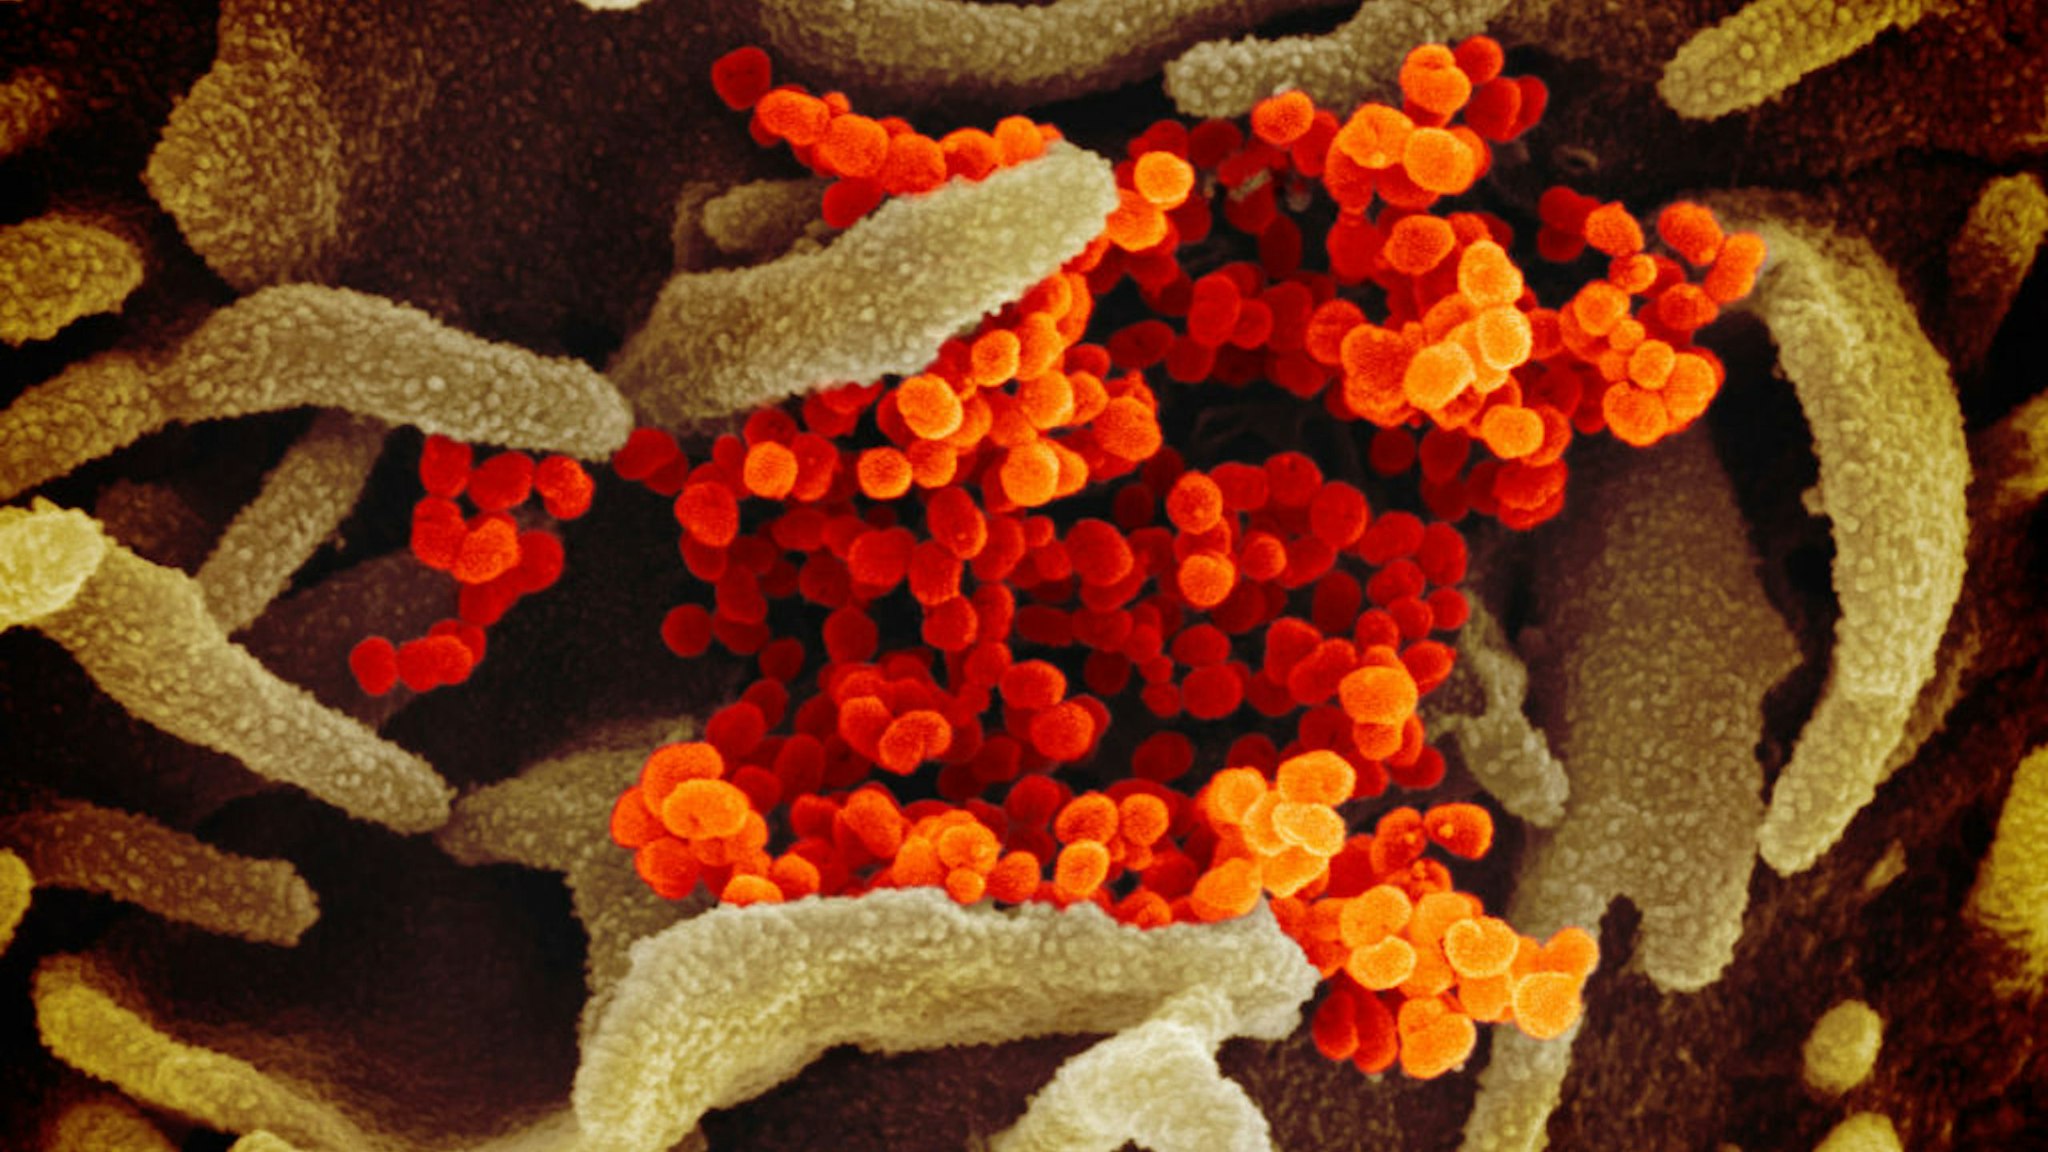 This scanning electron microscope image shows SARS-CoV-2 -also known as 2019-nCoV, the virus that causes COVID-19-isolated from a patient in the U.S., emerging from the surface of cells cultured in the lab.